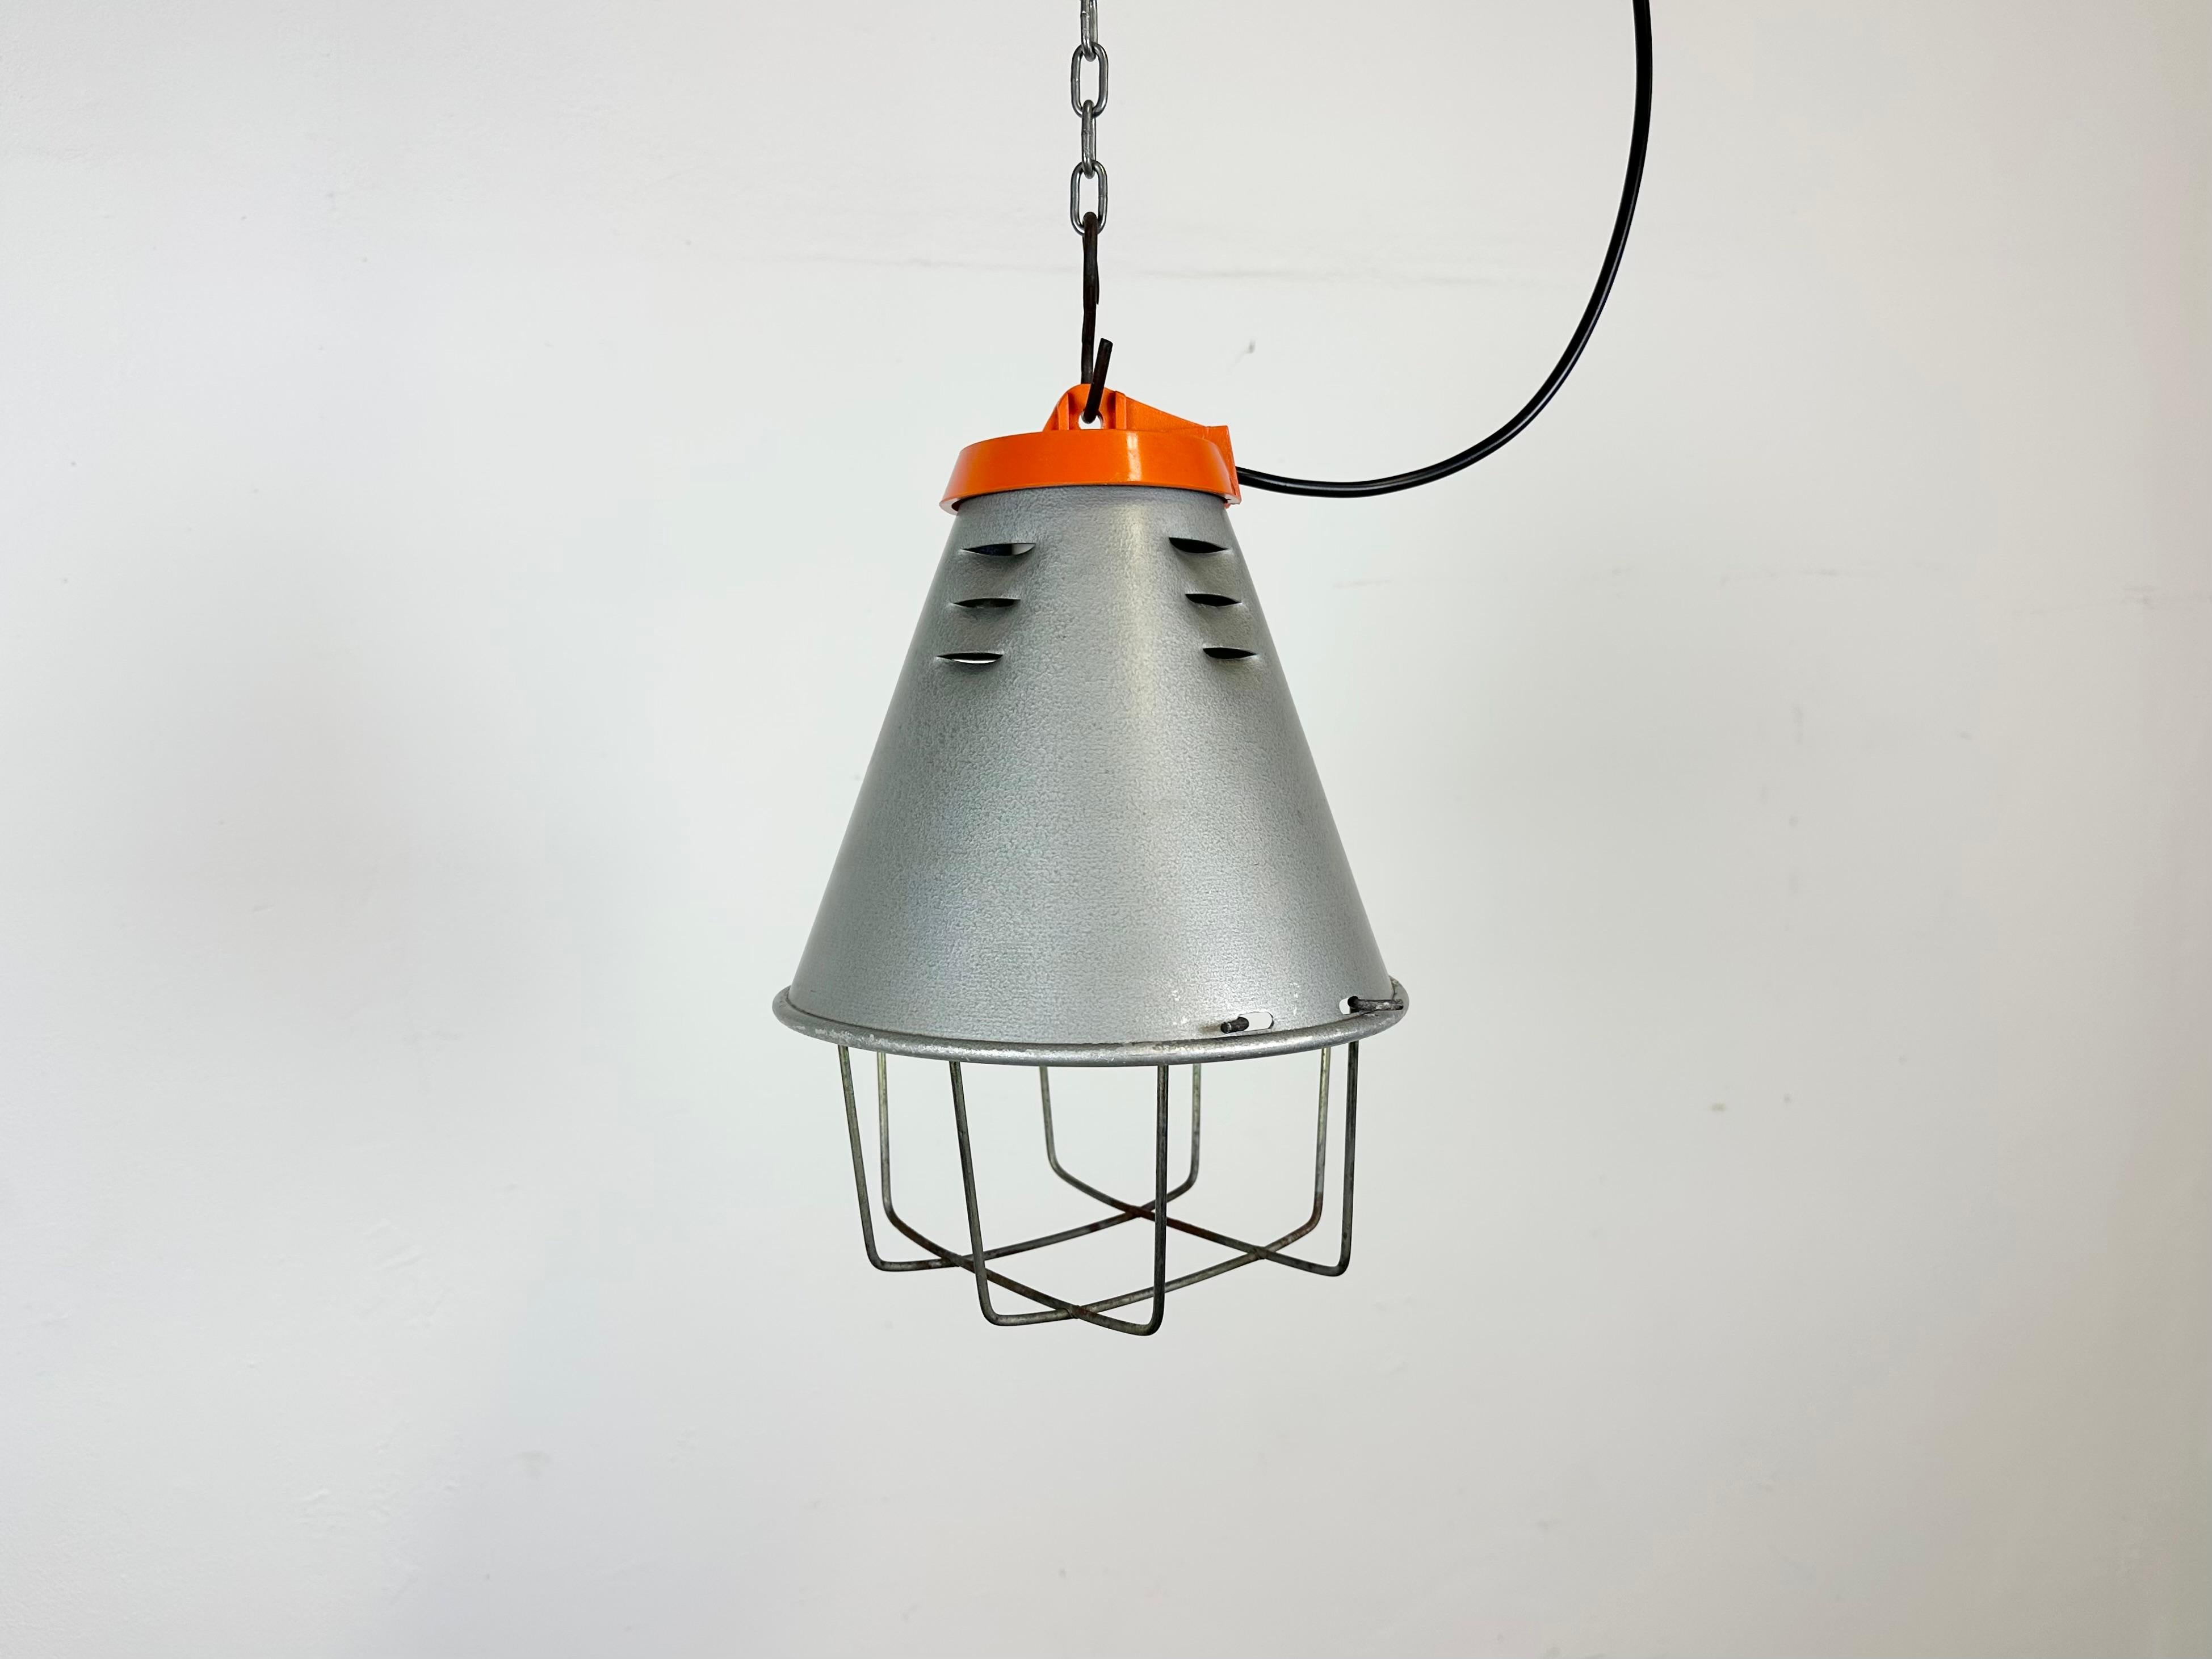 Industrial factory hanging lamp made by Polam Wilkasy in Poland during the 1970s. It features a grey hammerpaint aluminium shade, an orange bakelite top and an iron grid. The original porcelain socket requires standard E 27/ E 26 lightbulbs. New